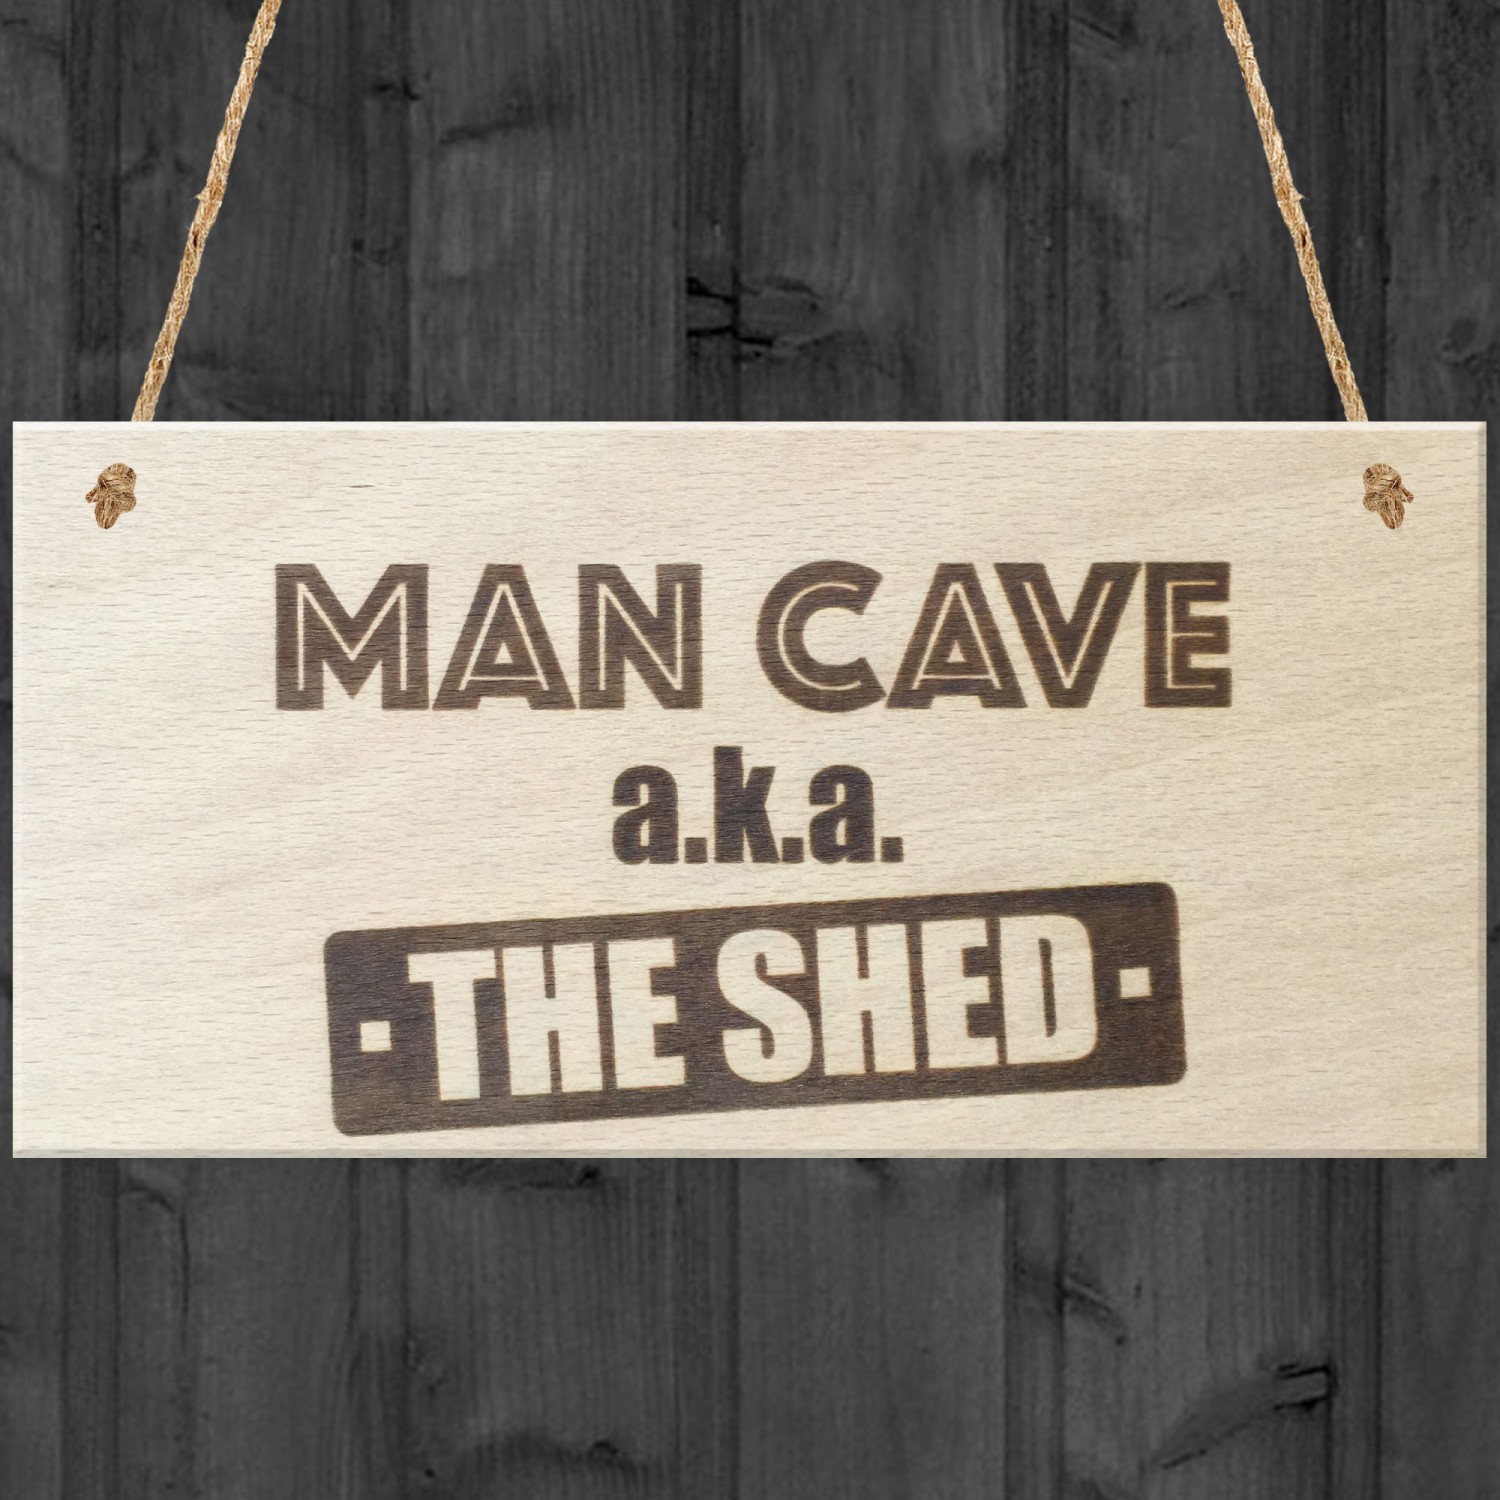 Man Cave The Shed Novelty Wooden Hanging Plaque Funny Sign 